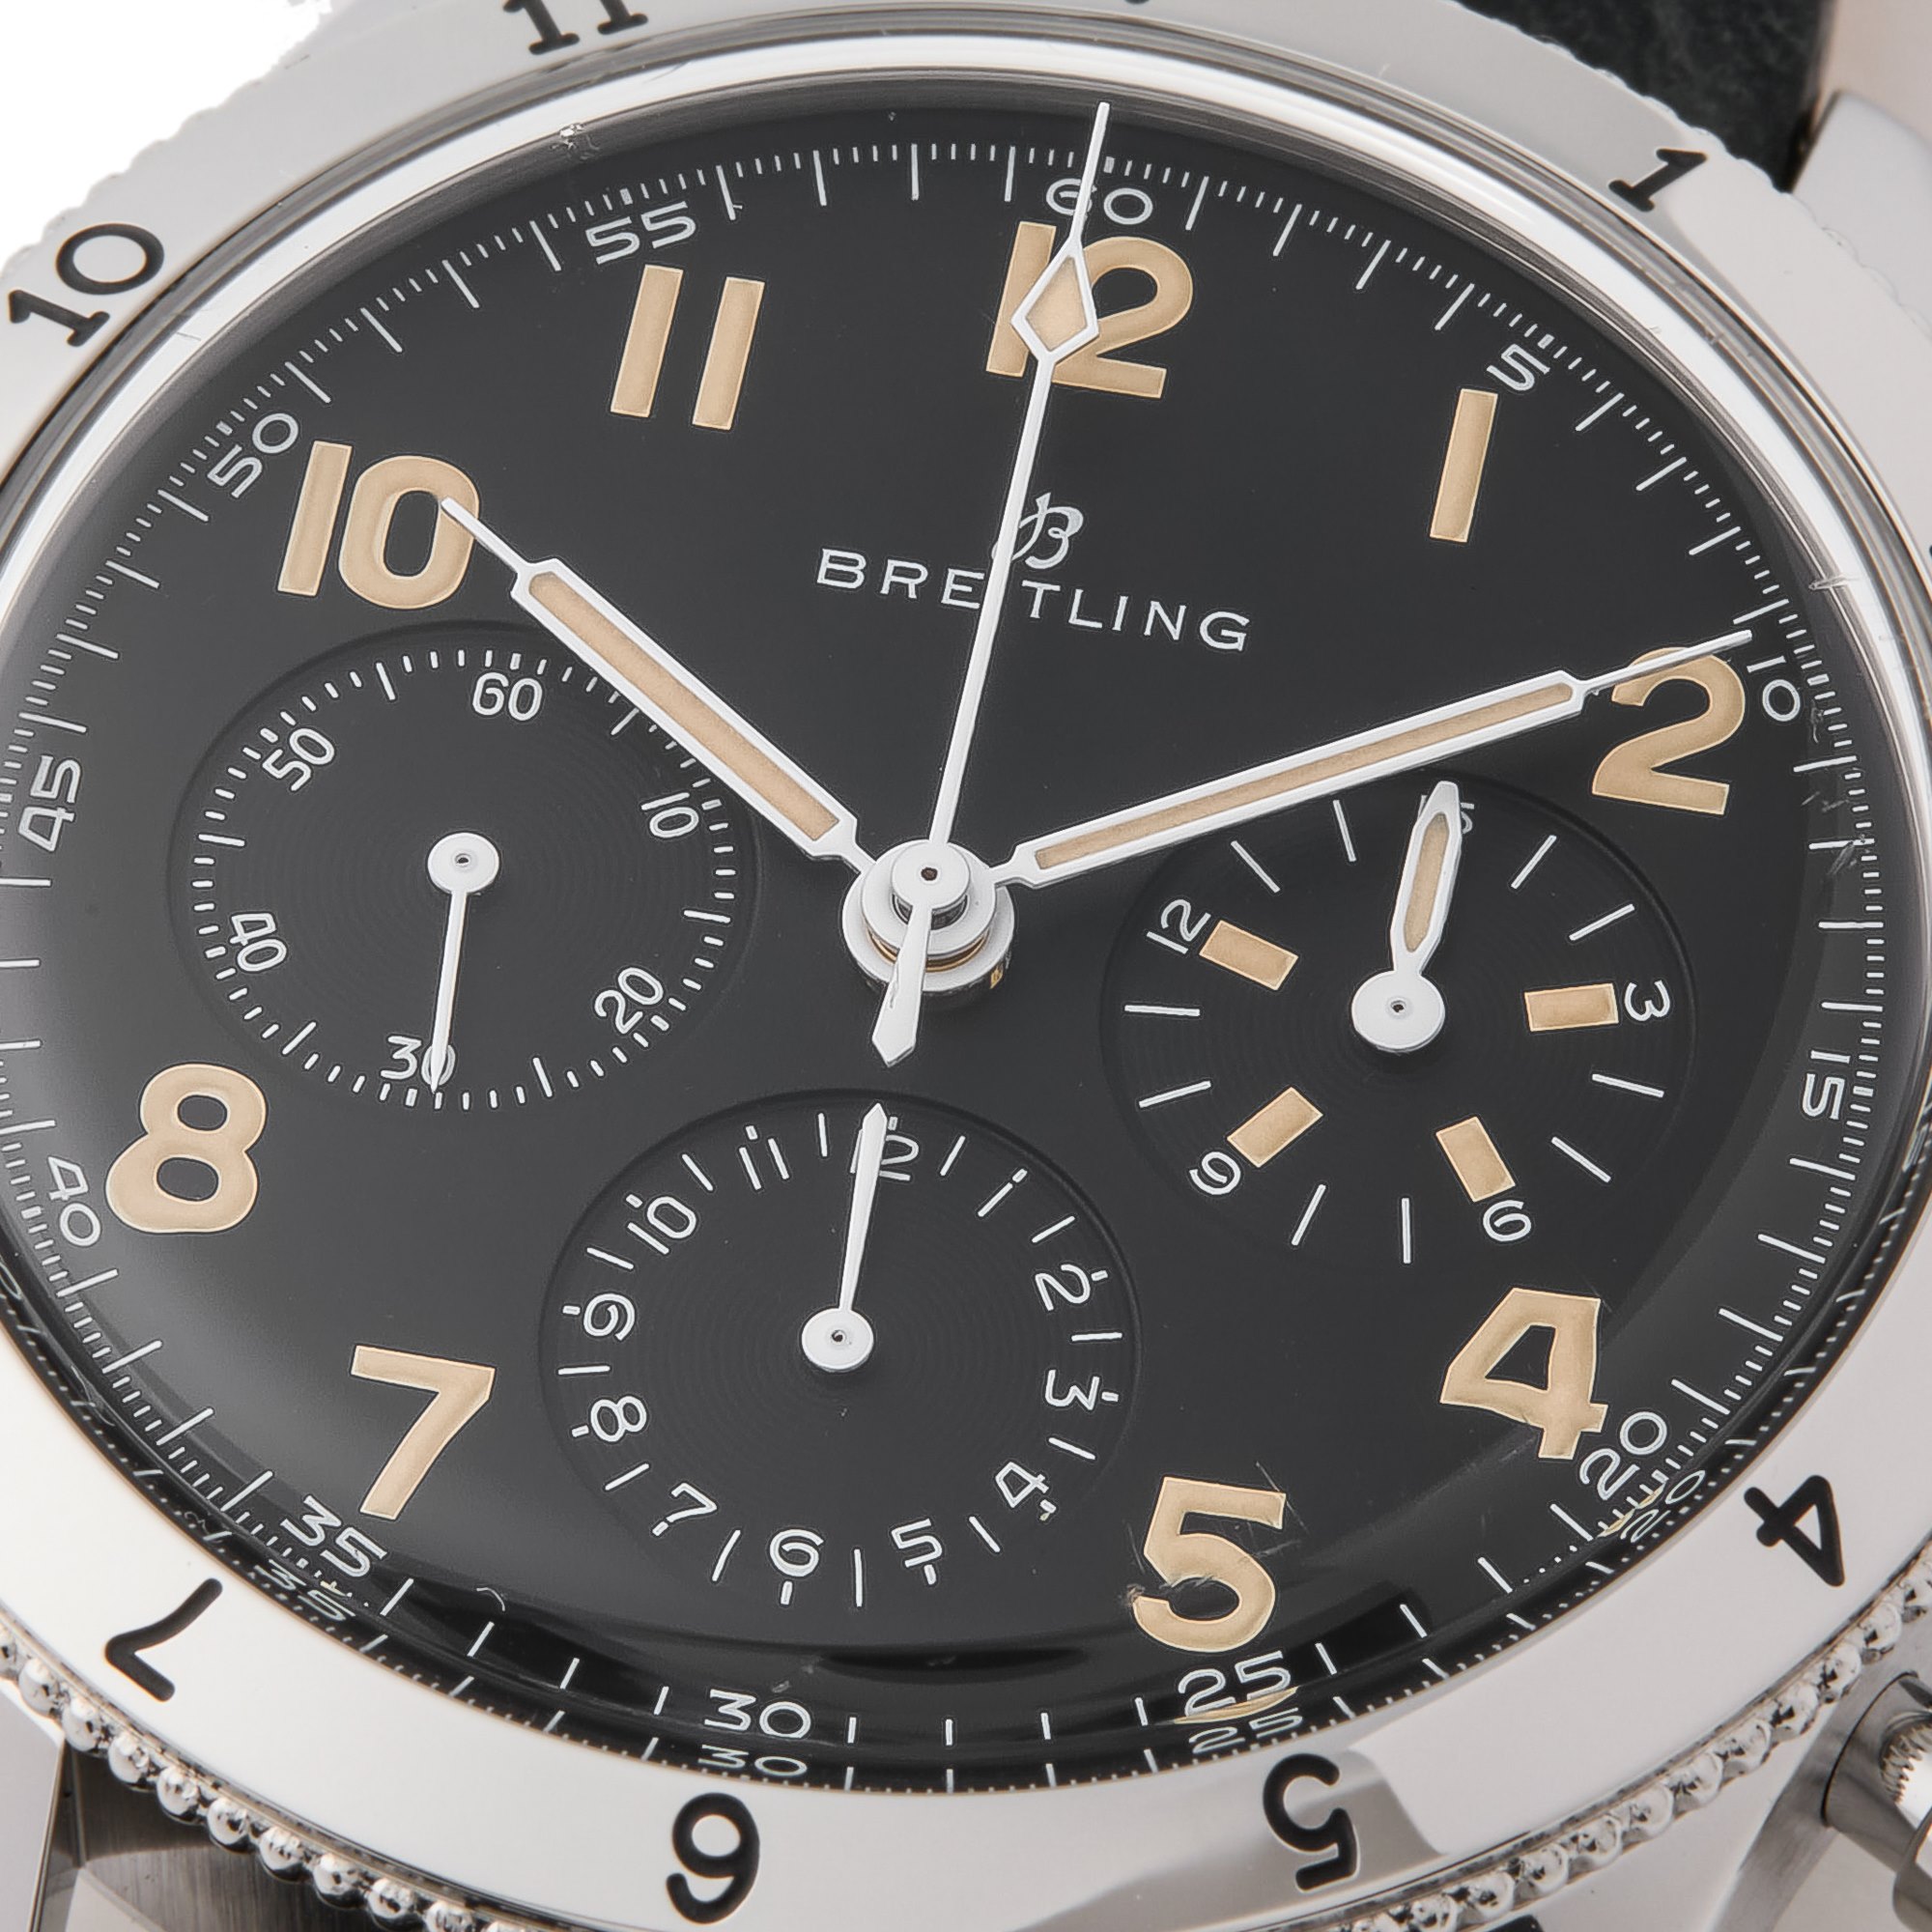 Breitling Aviator 8 AVI 1953 re-editon Limited edition one of 1953 Stainless Steel AB0920